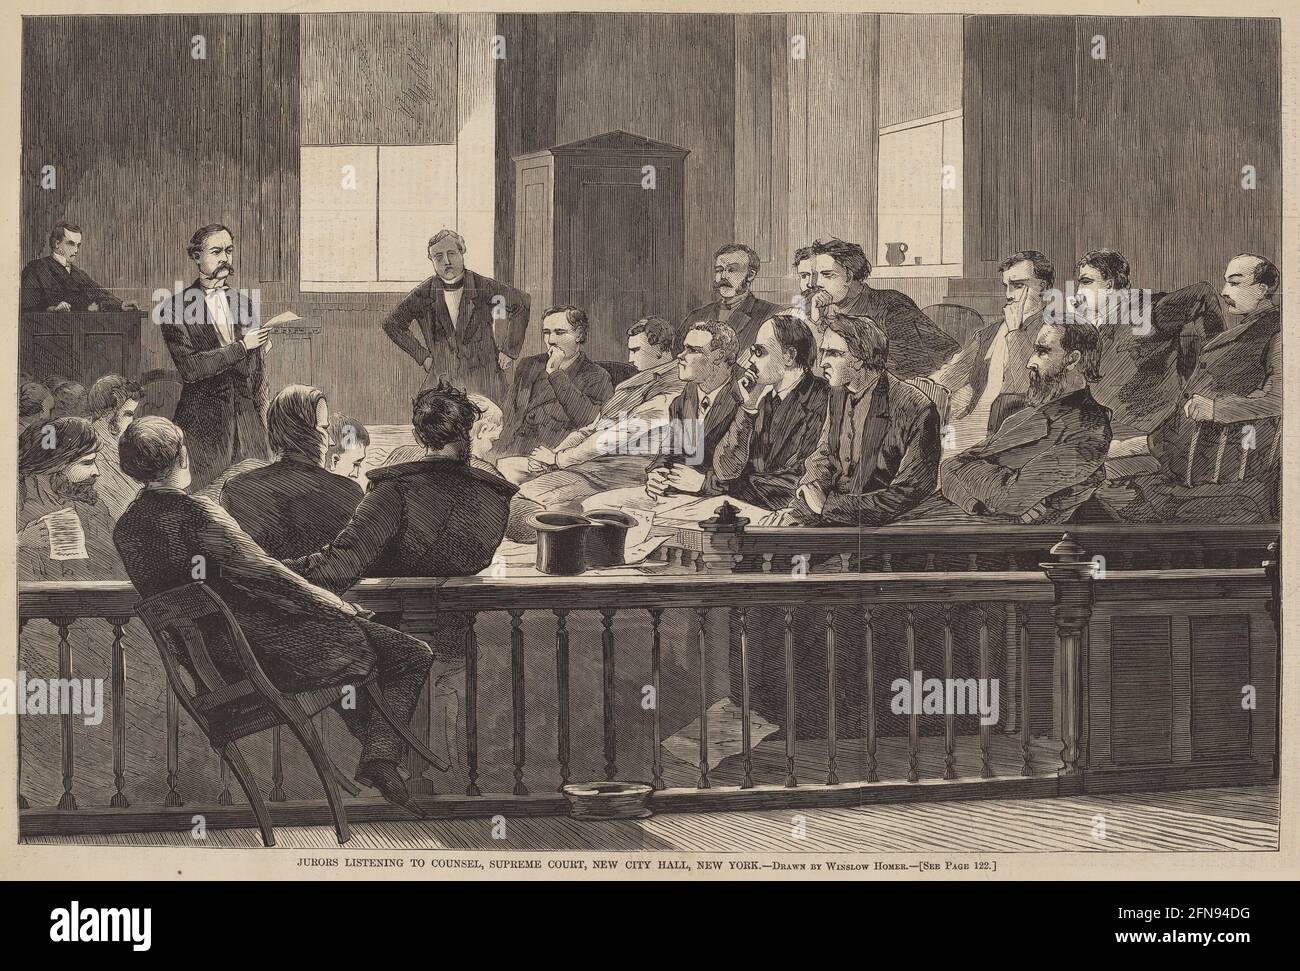 Jurors Listening to Counsel, Supreme Court, New City Hall, New York, published 1869. Stock Photo